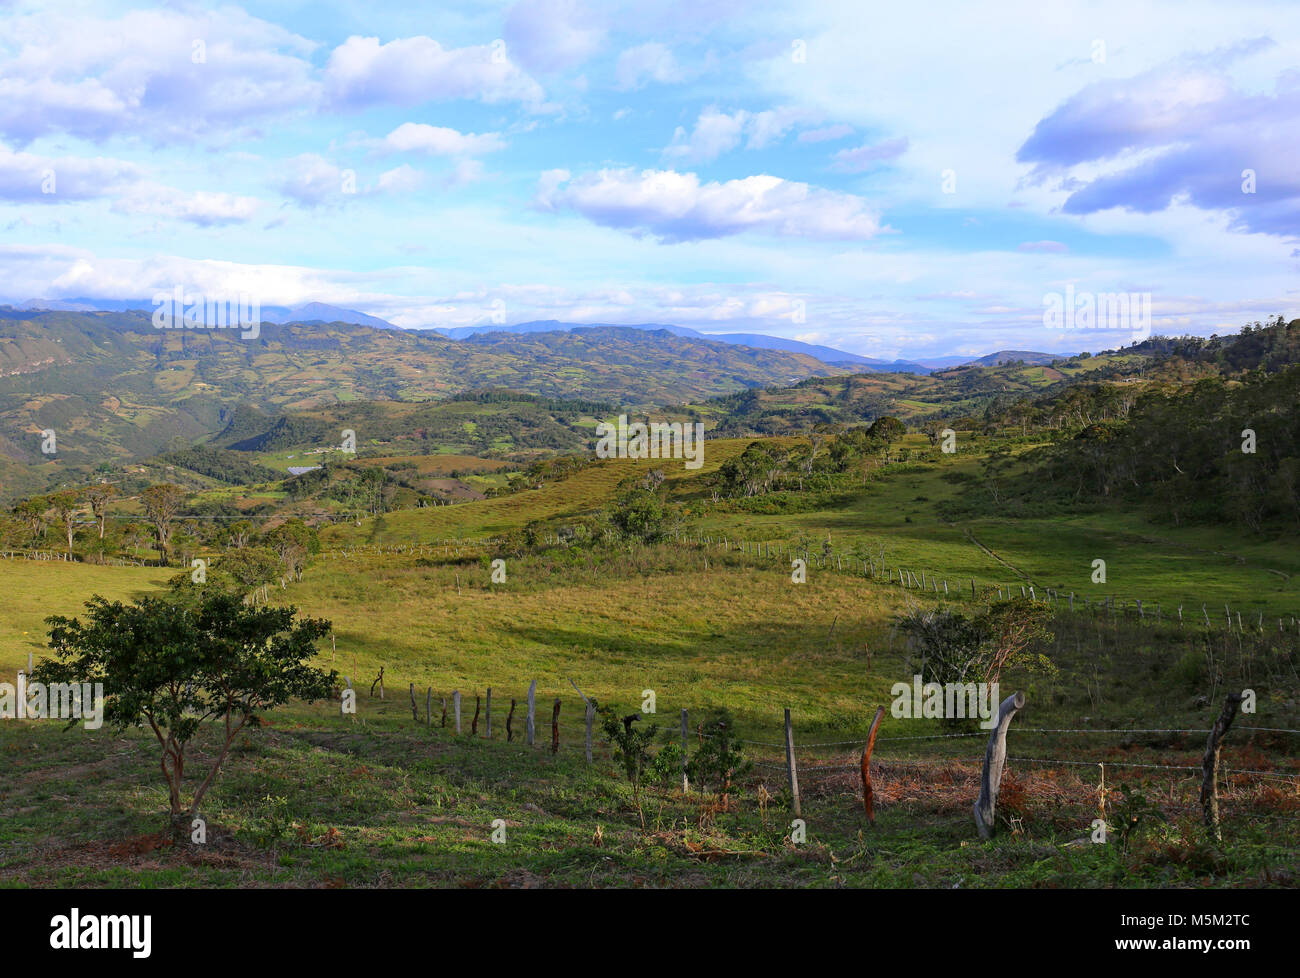 Green Landscape with Hills - Colombia Landscape, south america Stock Photo